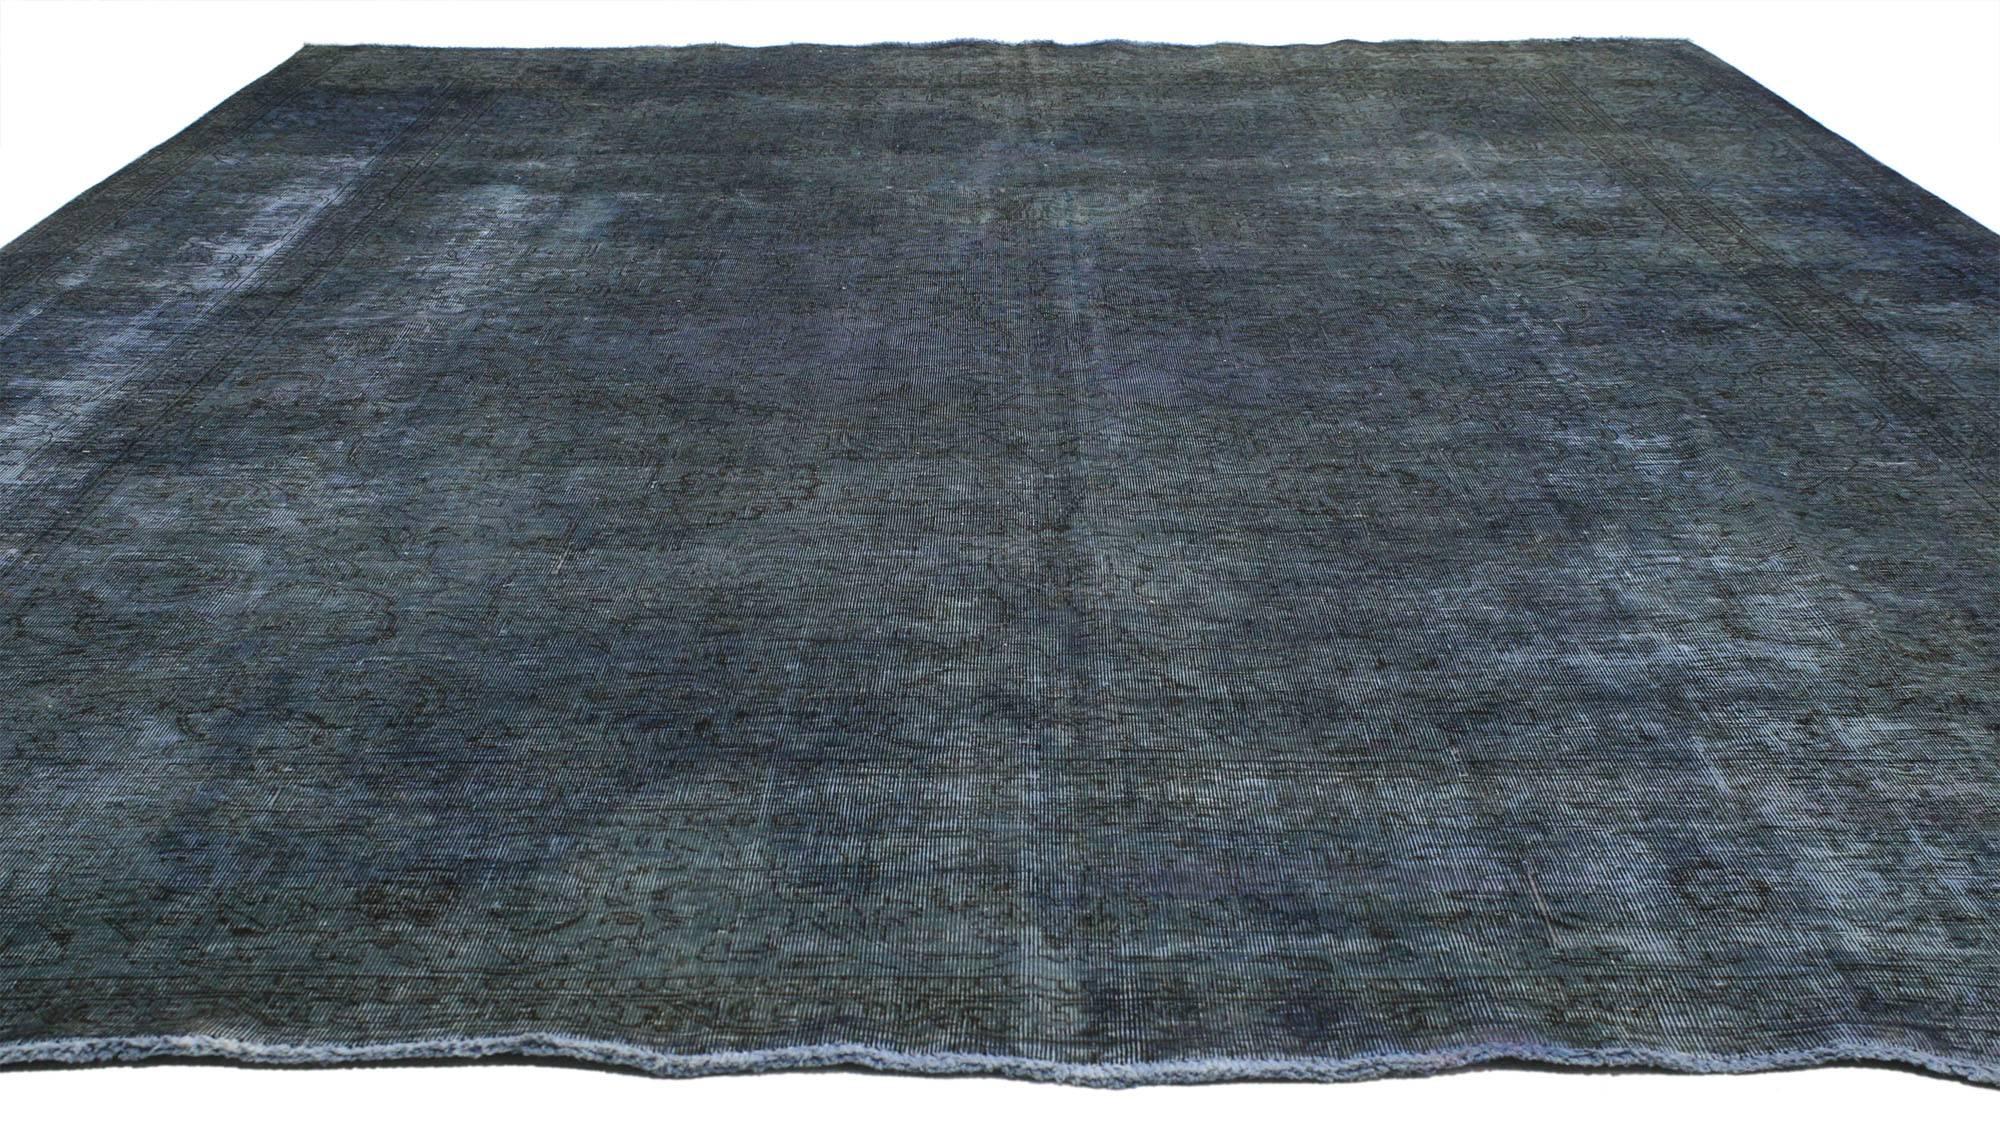 80395, Rustic Industrial Distressed Vintage Overdyed Persian Area Rug. This blue-grey colored rug combines the Classic elegance of traditional Persian rug motifs such as ornate floral and scroll work designs with a contemporary overdyed finish. The